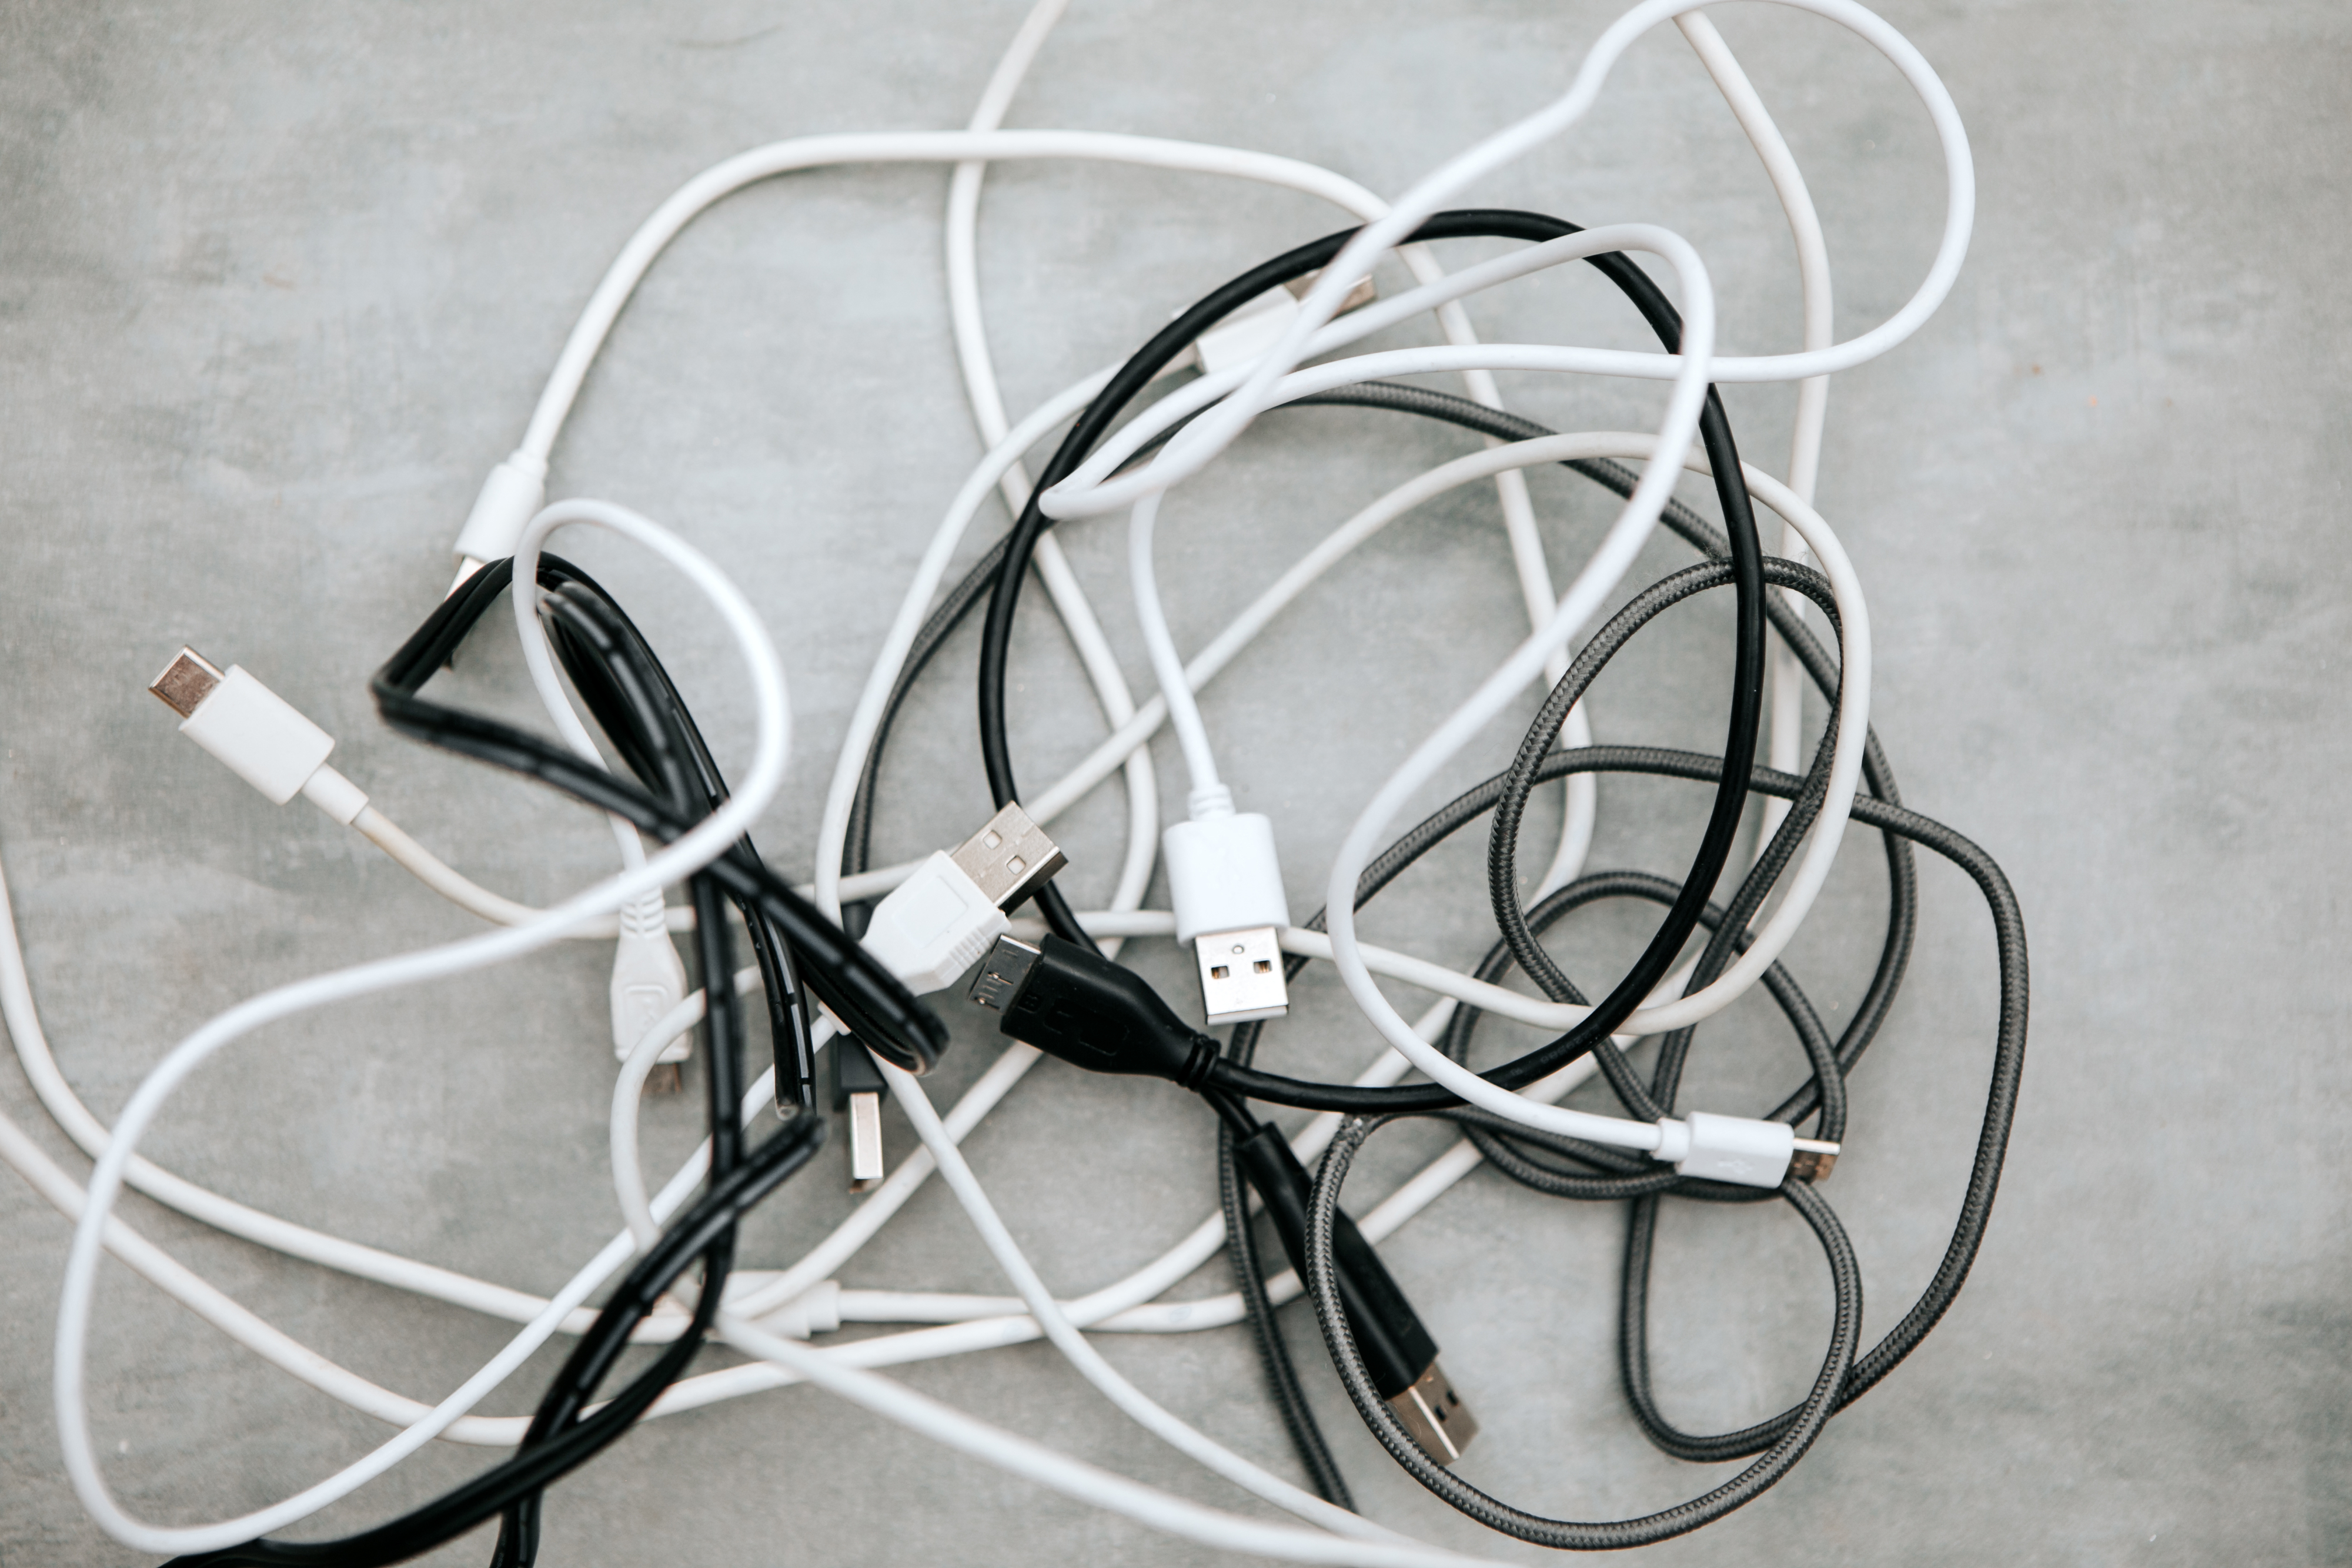 charging cords tangled together